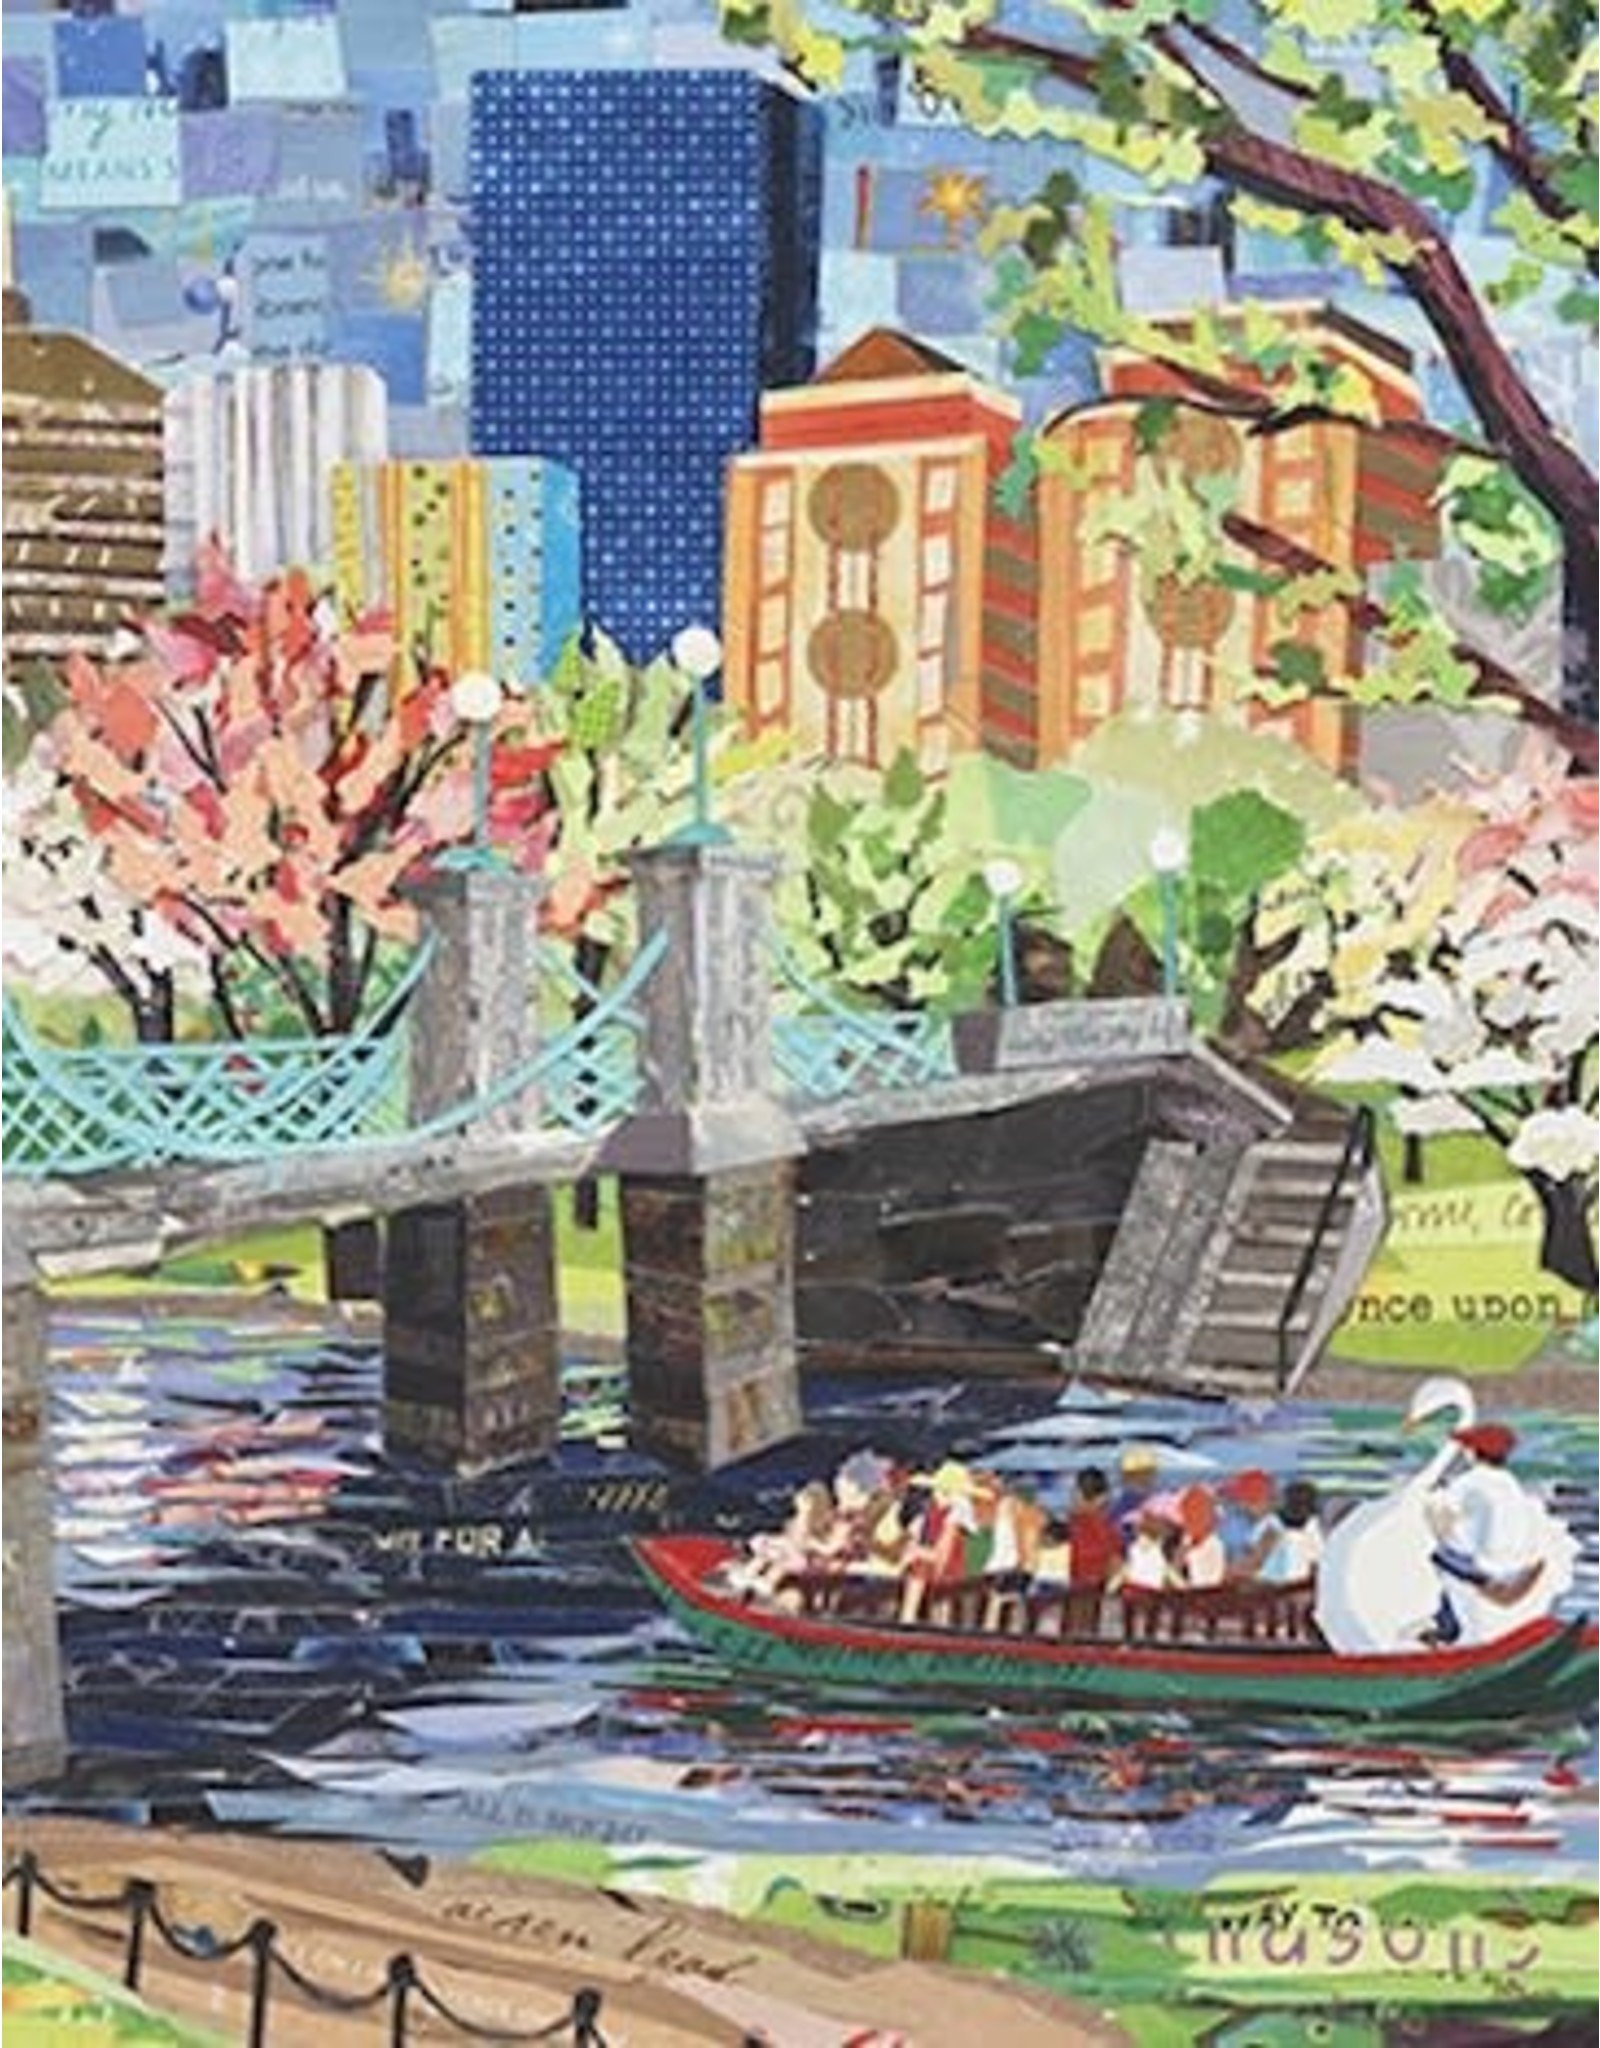 Janice Hayes-Cha Swan Boats in the Public Garden Matted Print